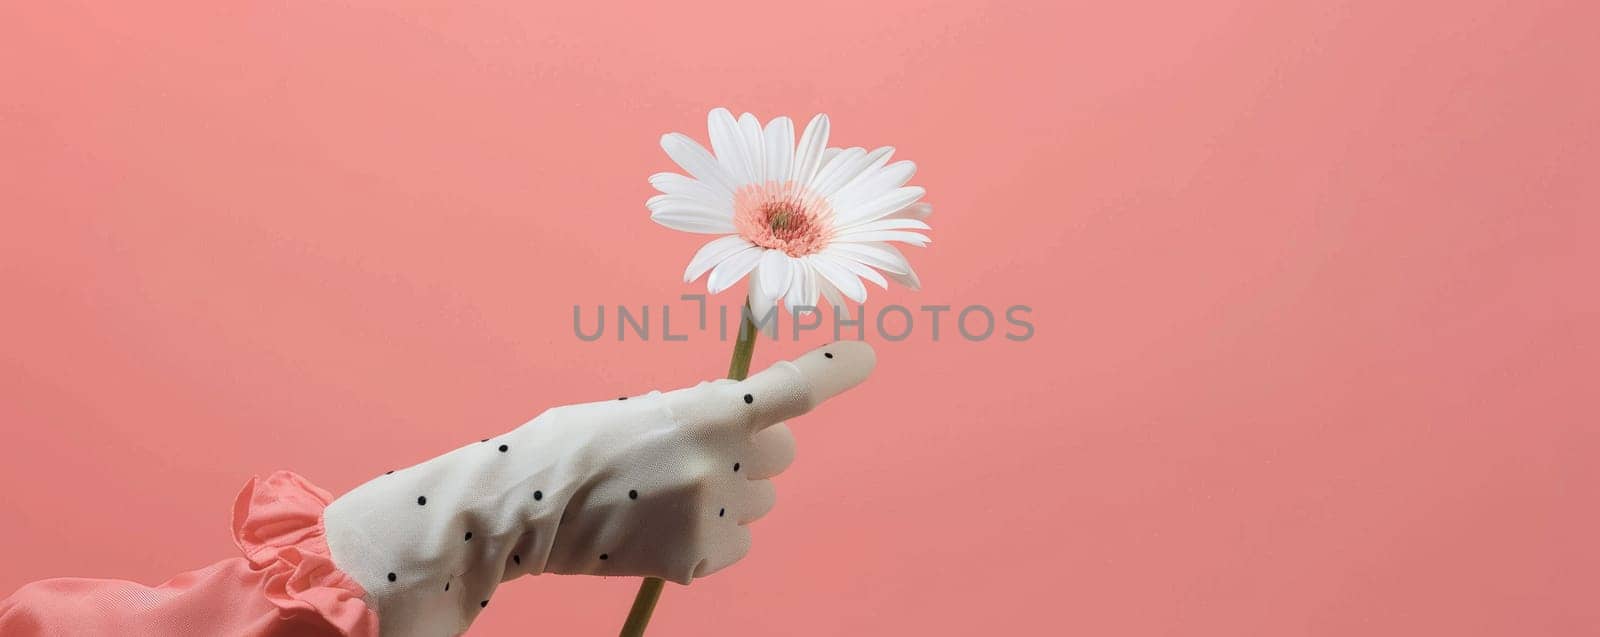 White polka dot glove holding a daisy flower against a pink background by Anastasiia